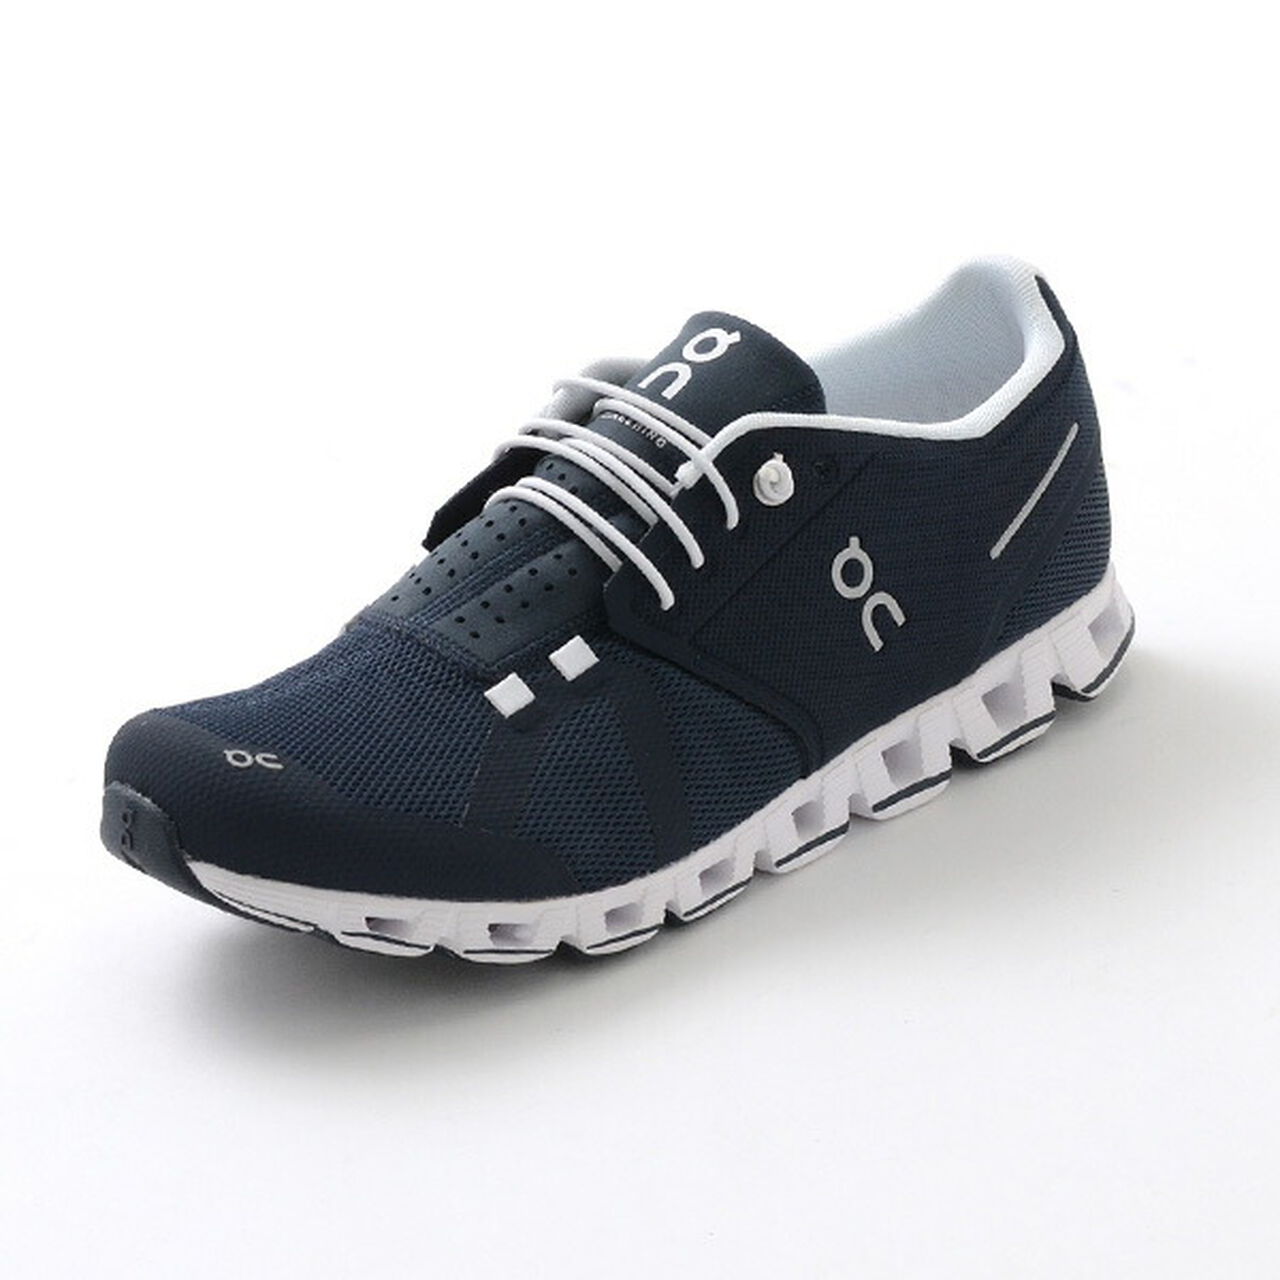 Cloud 5 Sneakers,Navy_White, large image number 0